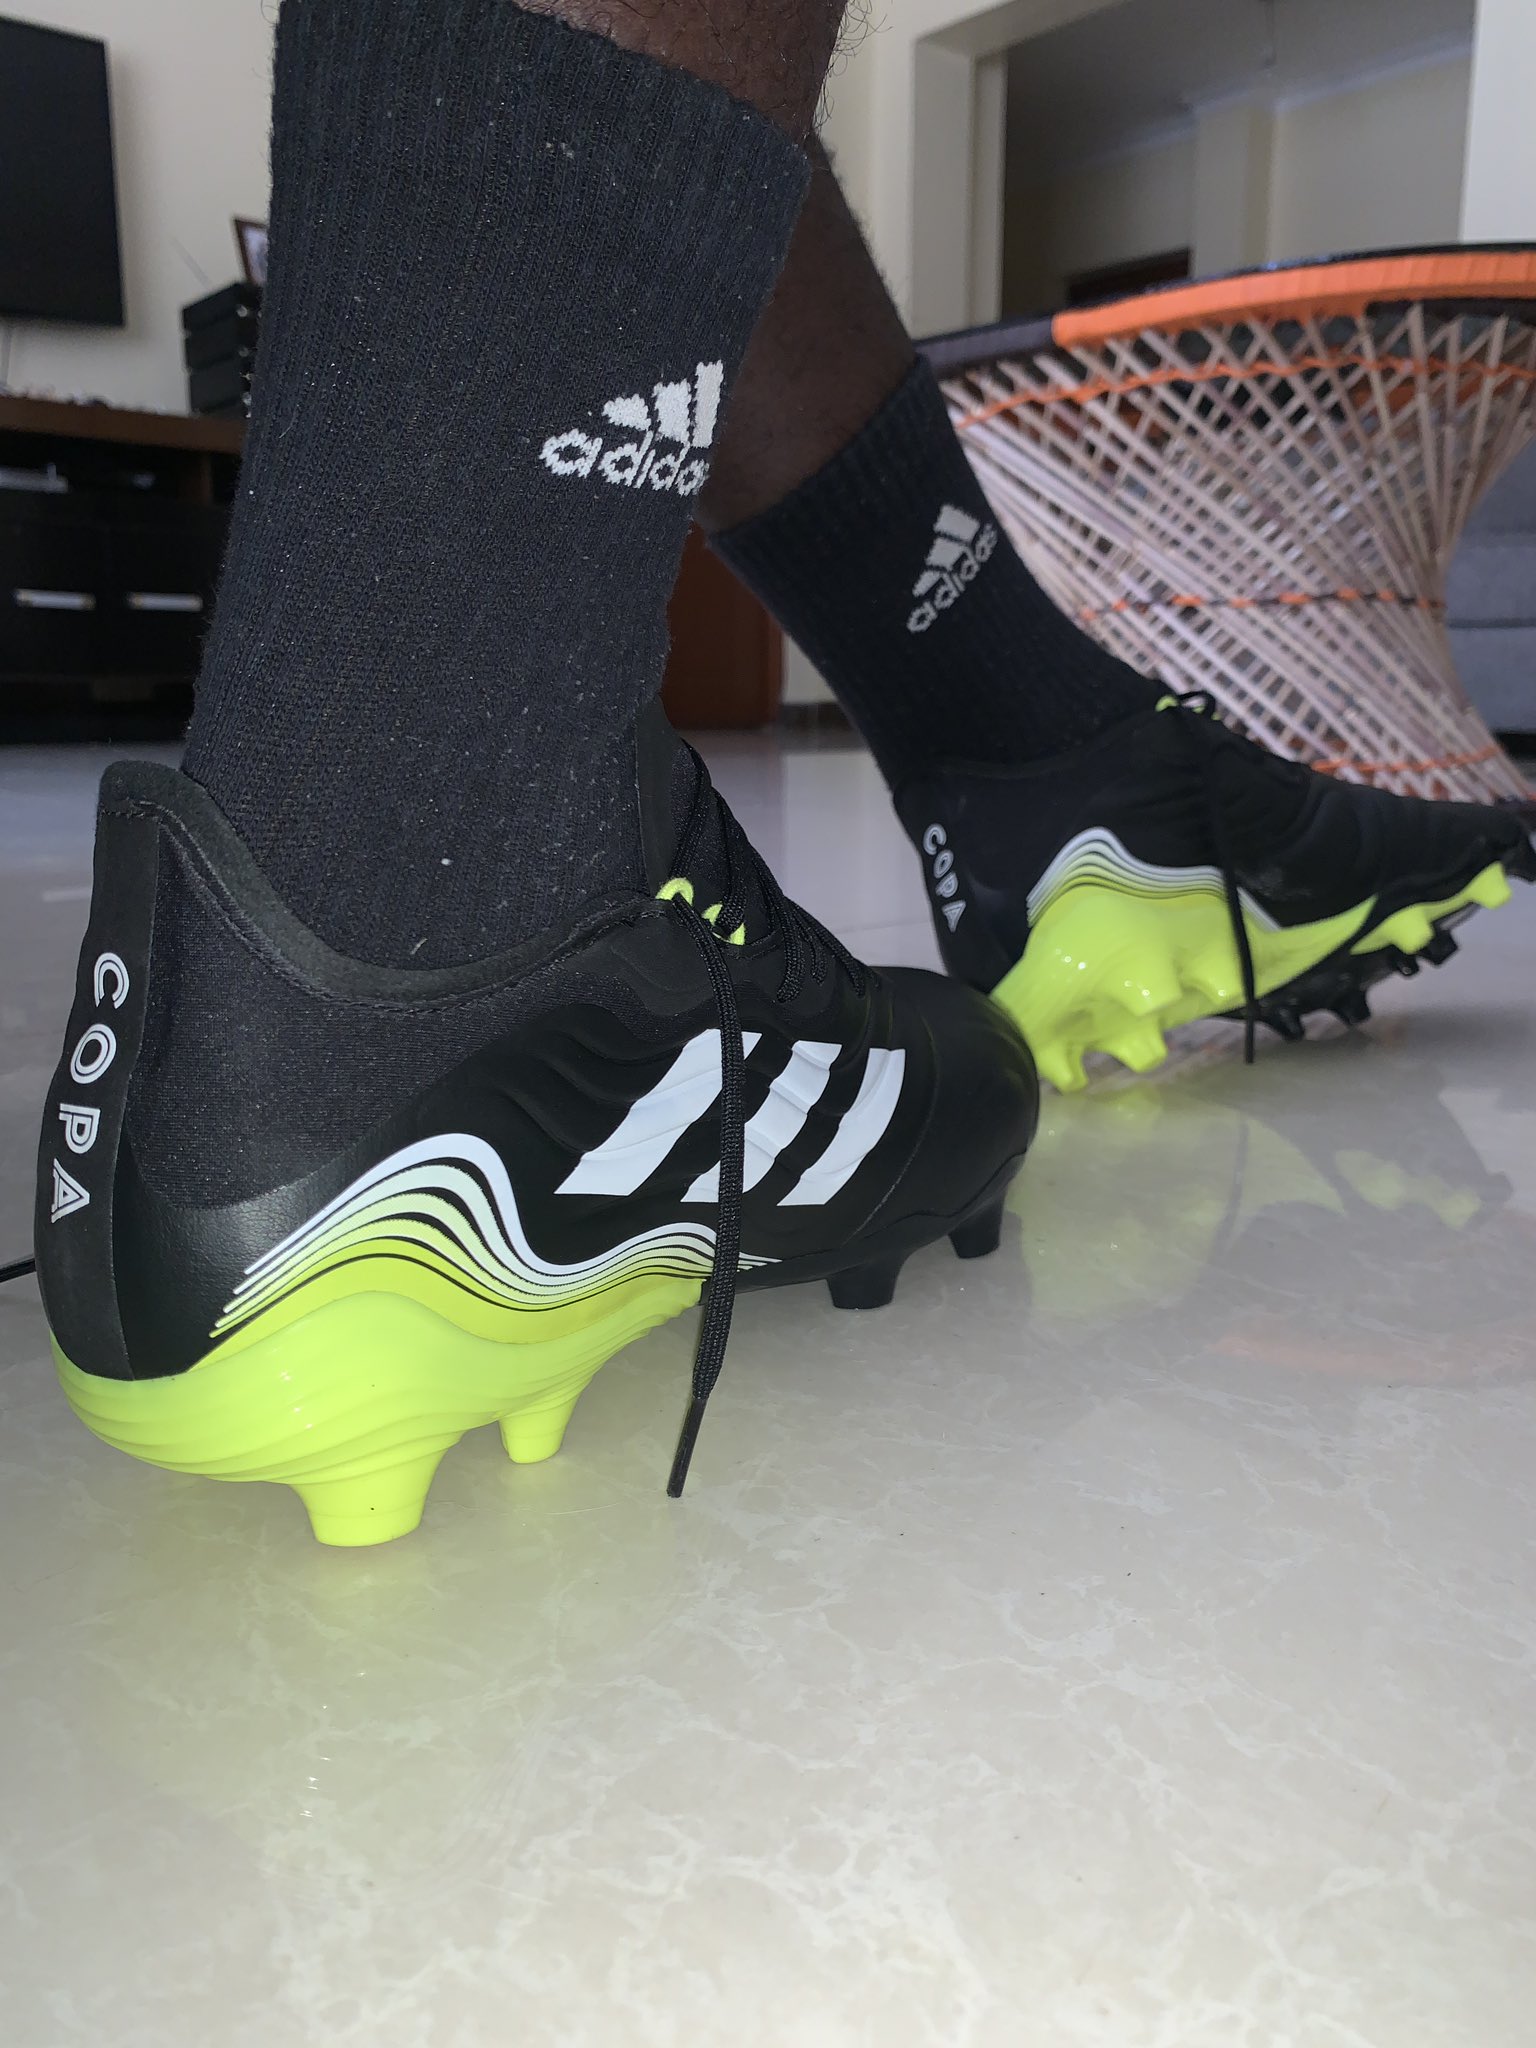 Wassandra on Twitter: "Selling these Brand New Adidas Copa Sense.2 Size:US  10 UK 9.5 (44) @ 15k Ps: Unfortunately they don't fit me hence selling  them. https://t.co/FQs80MaLWn" / Twitter